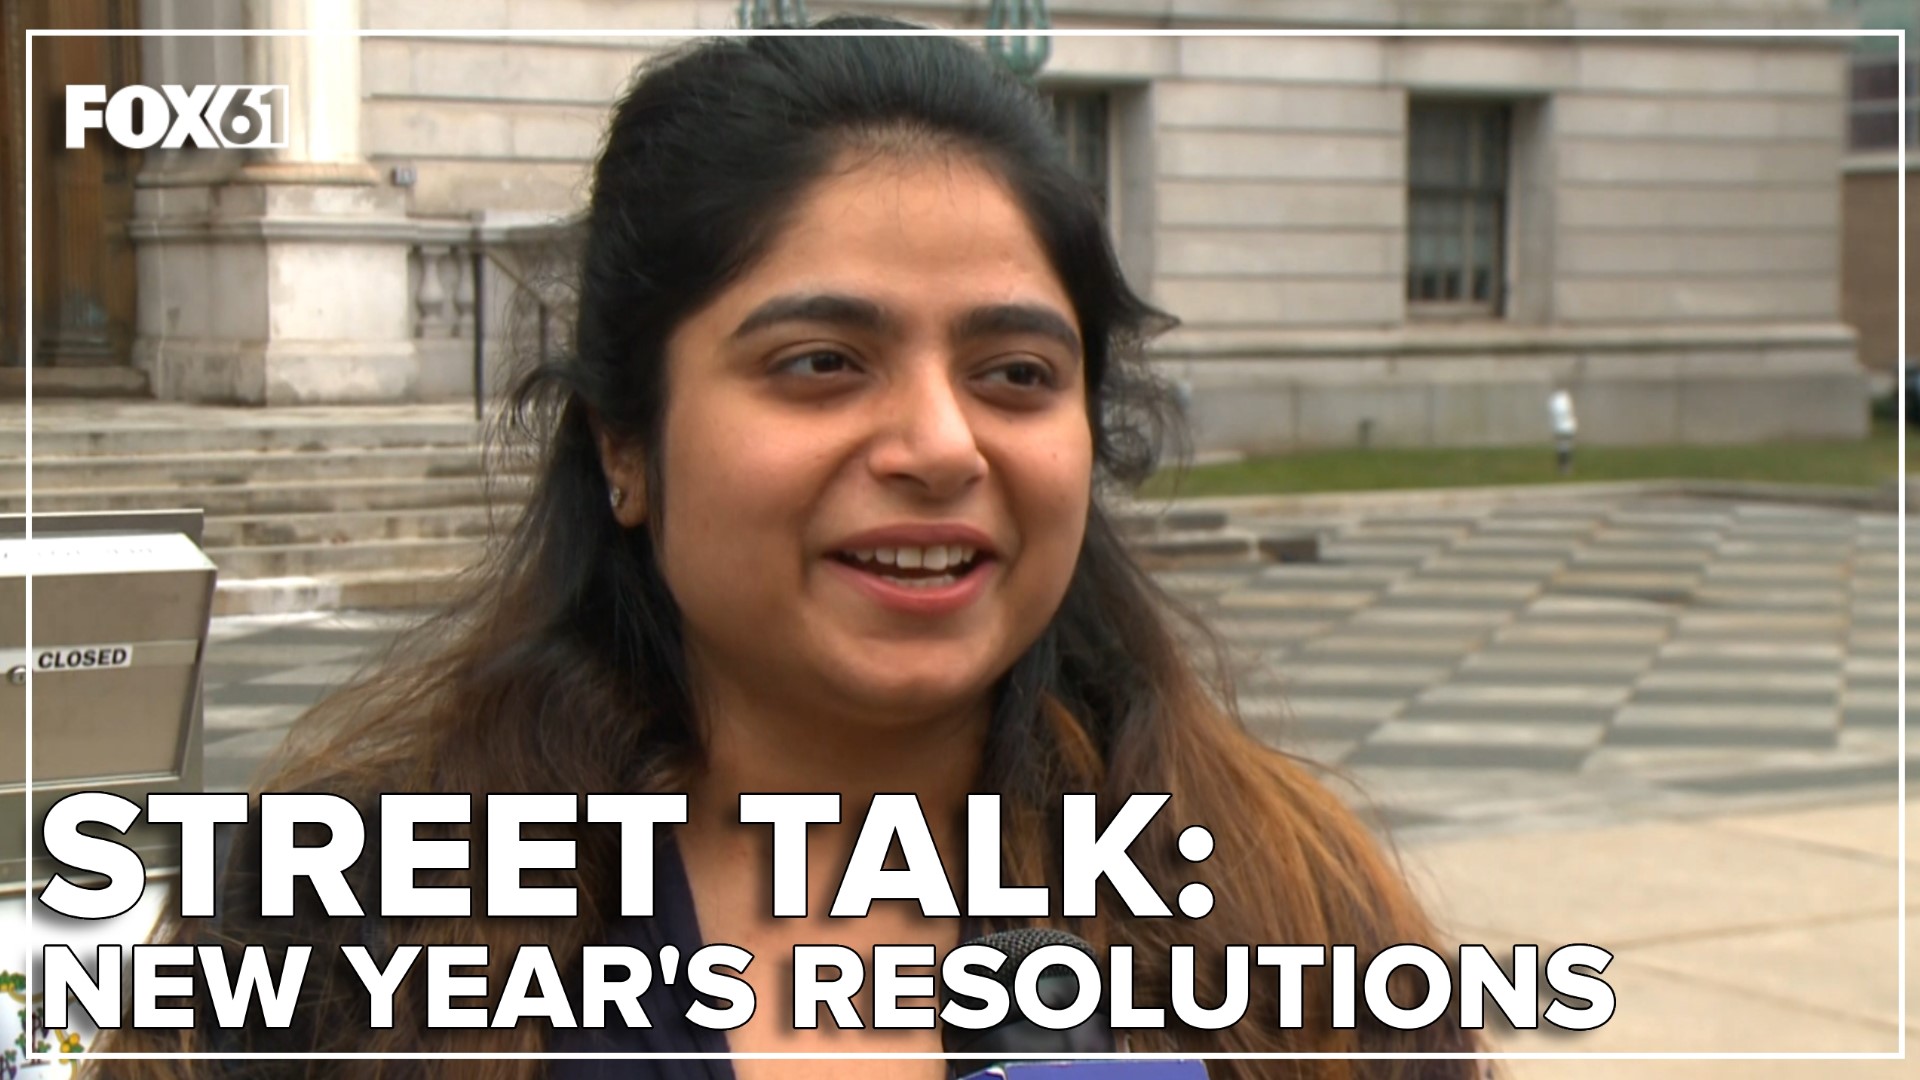 People we spoke to share their resolutions for 2023 and folks from BodyRoc in West Hartford give advice on how to keep a resolution.